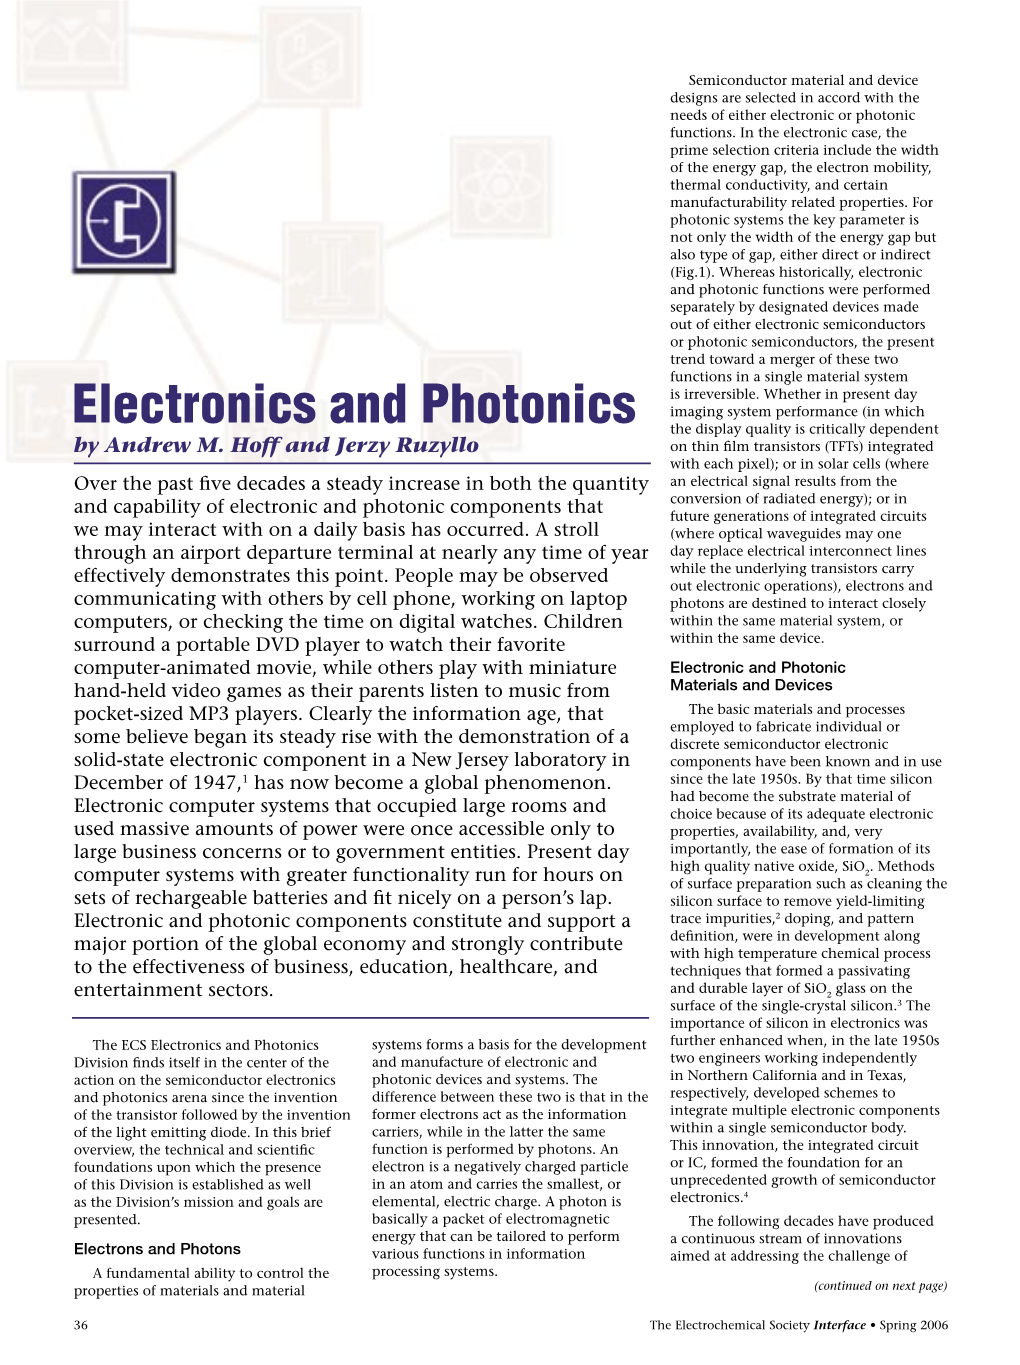 Electronics and Photonics Imaging System Performance (In Which the Display Quality Is Critically Dependent by Andrew M